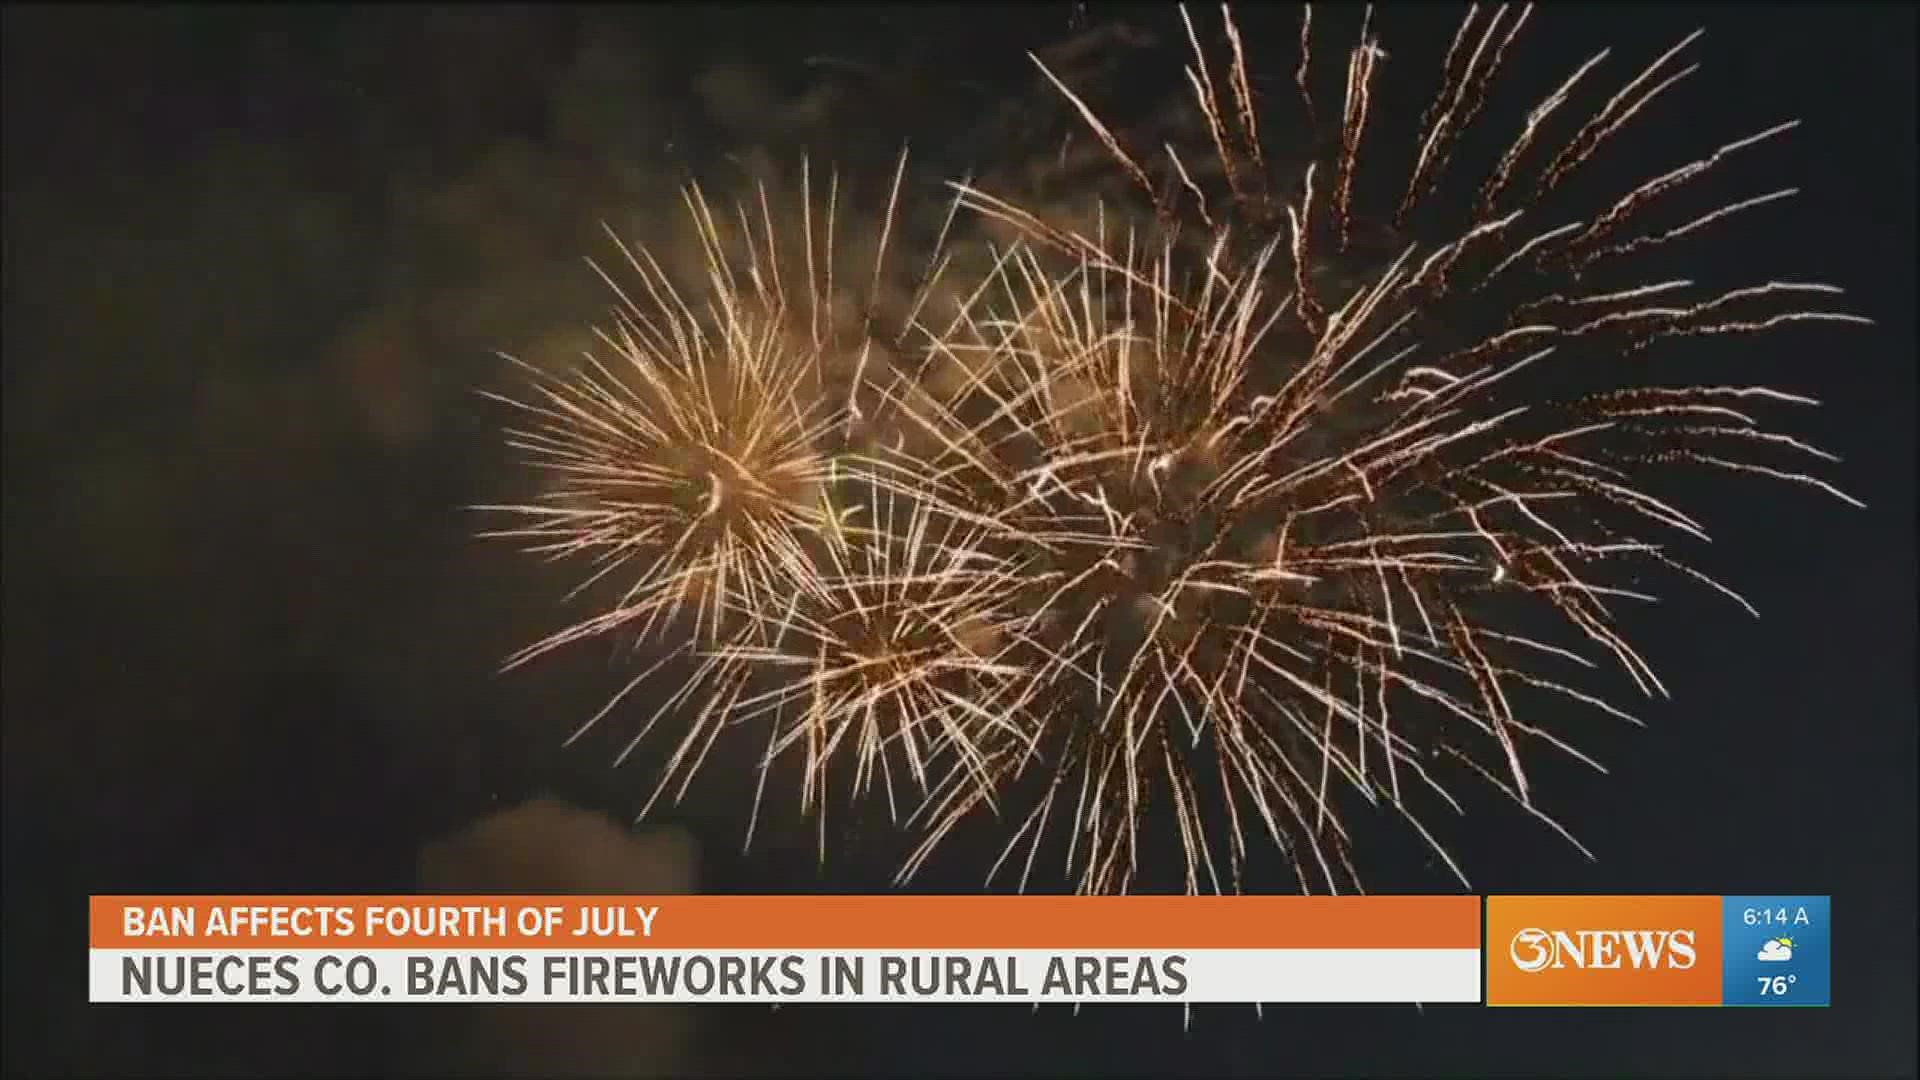 Leaders said even if we get some rain before the Fourth of July, conditions will still be dangerously dry.